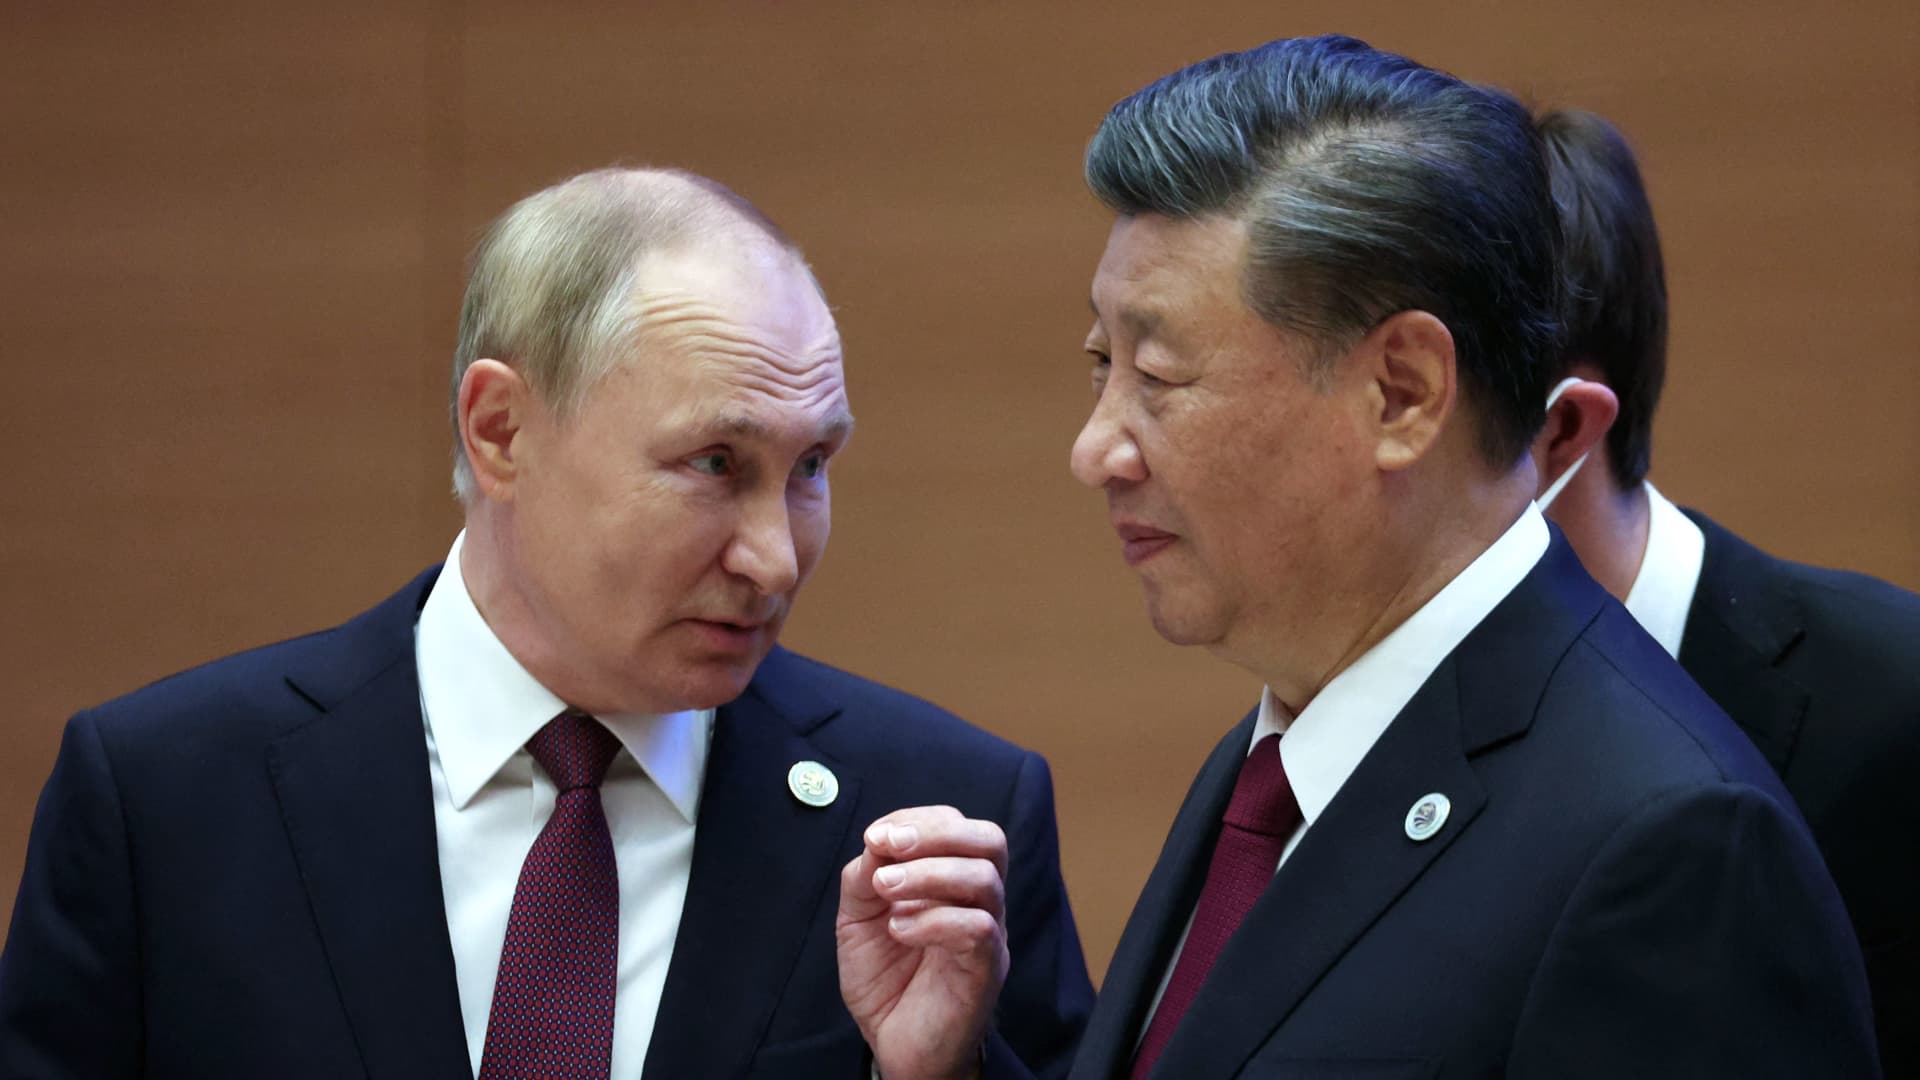 China’s Xi to go to Russia next week for his first visit since Putin ordered invasion of Ukraine